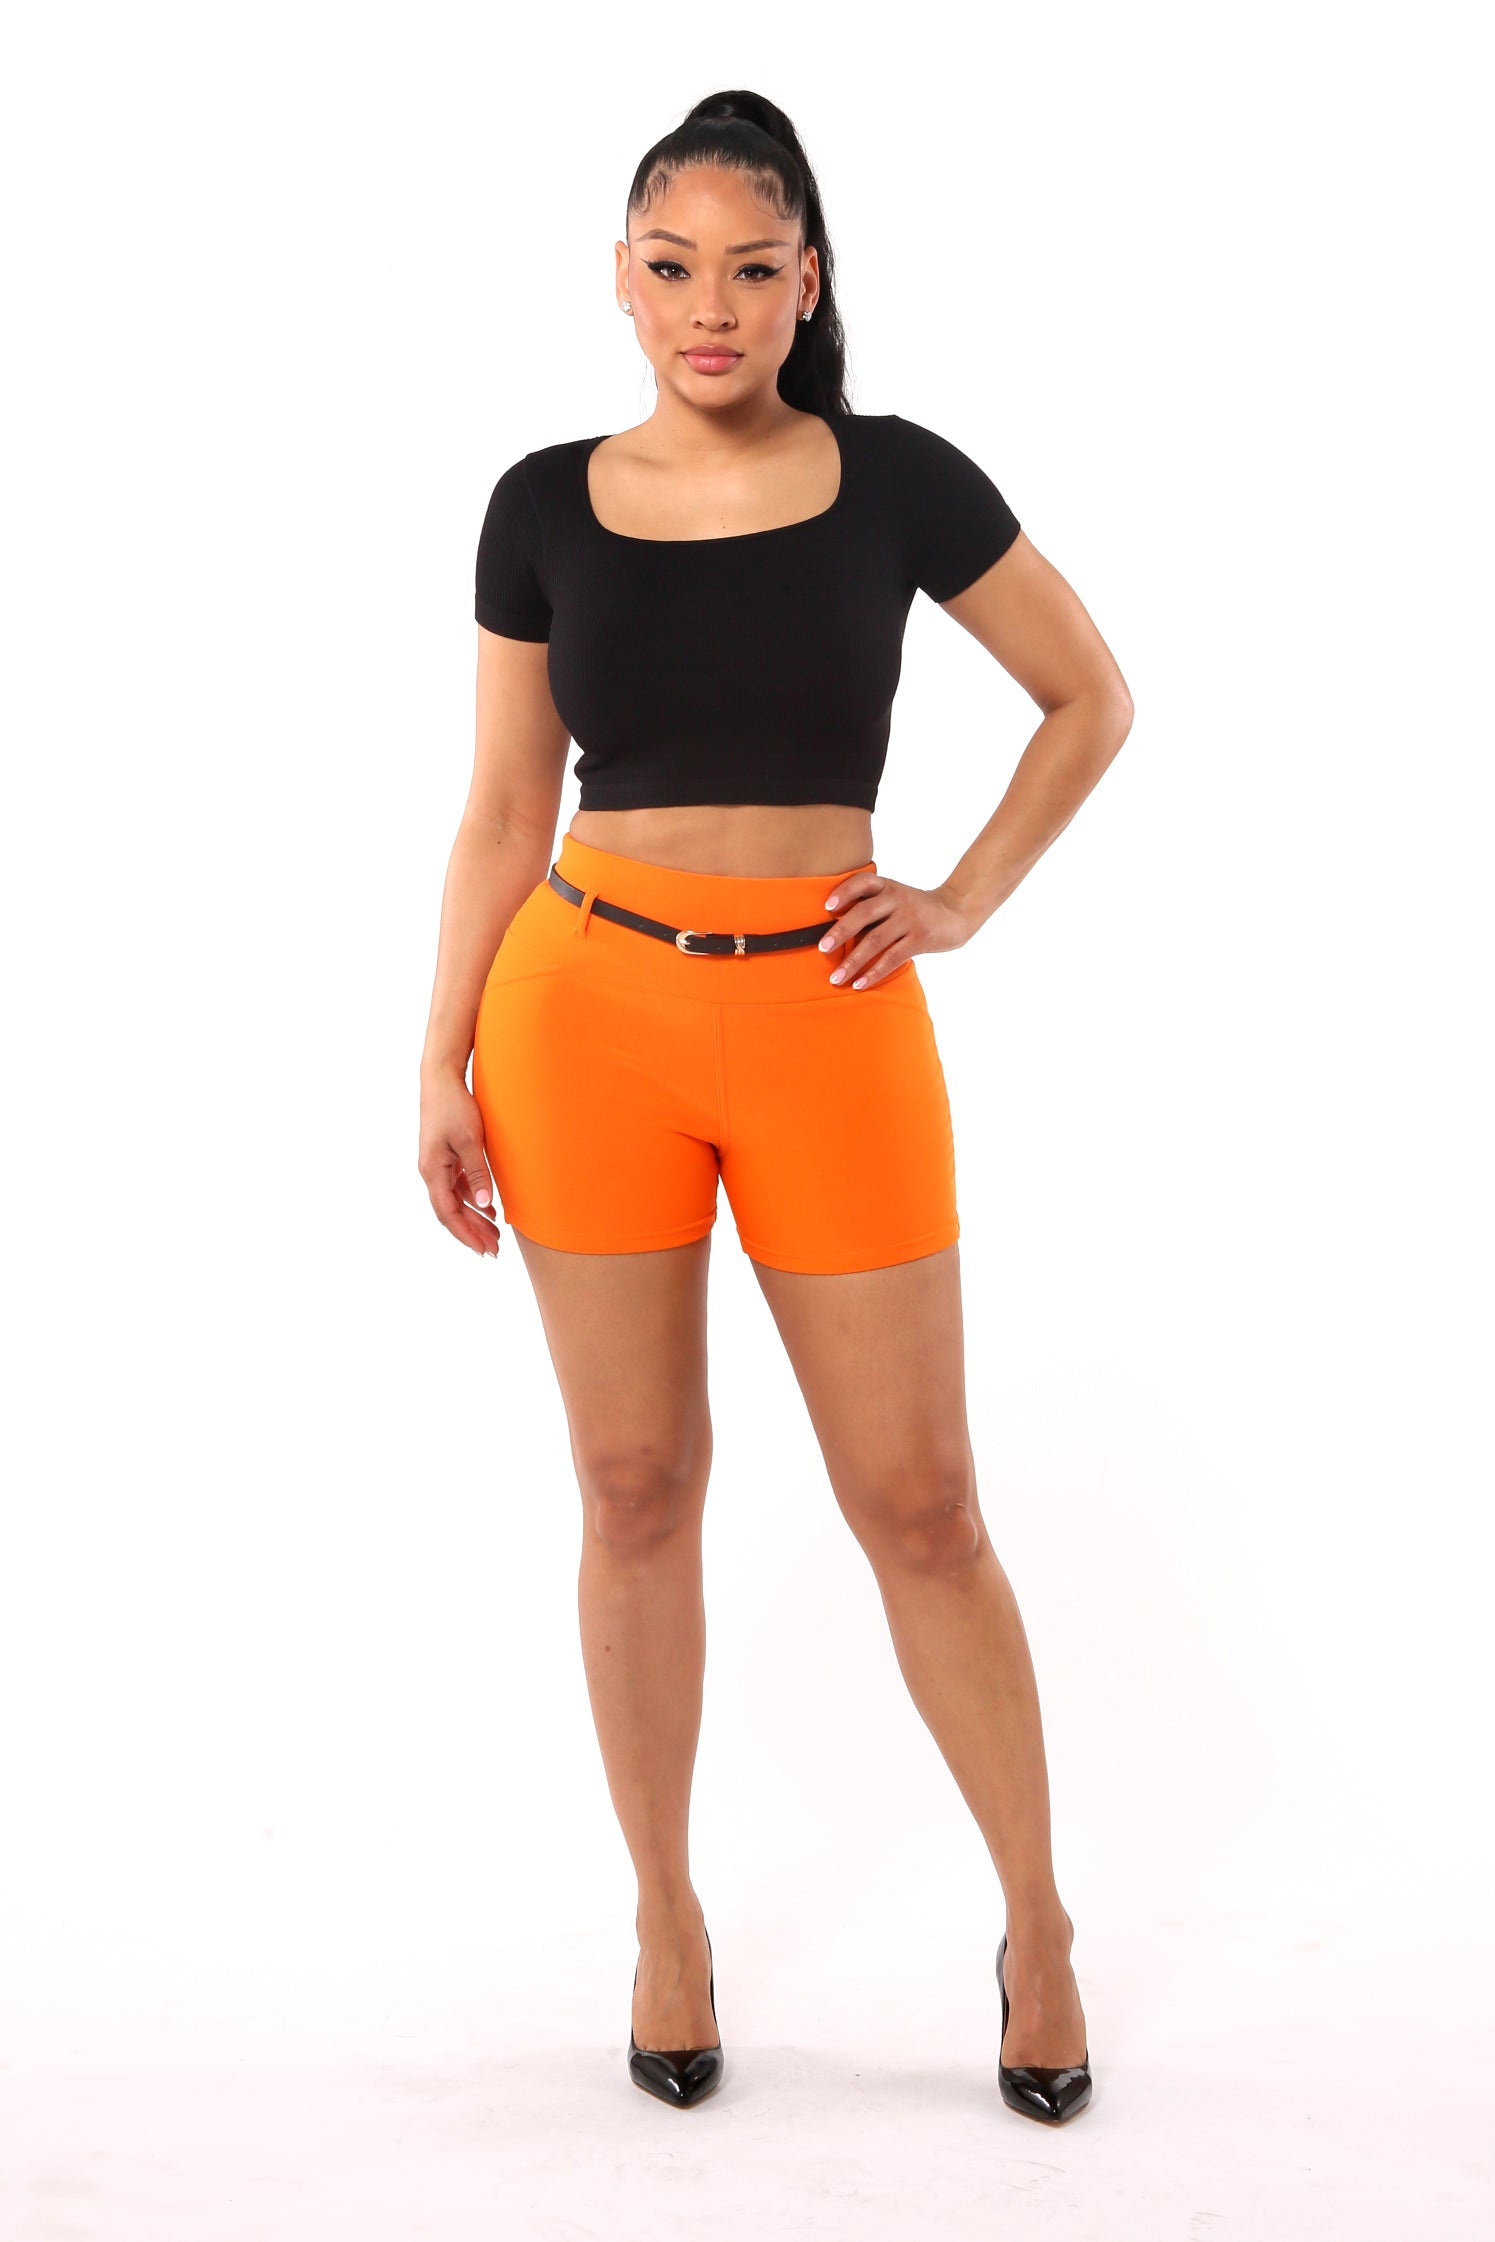 Wholesale Womens High Waist Sculpting Shorts With Faux Leather Belt - Orange - S&G Apparel